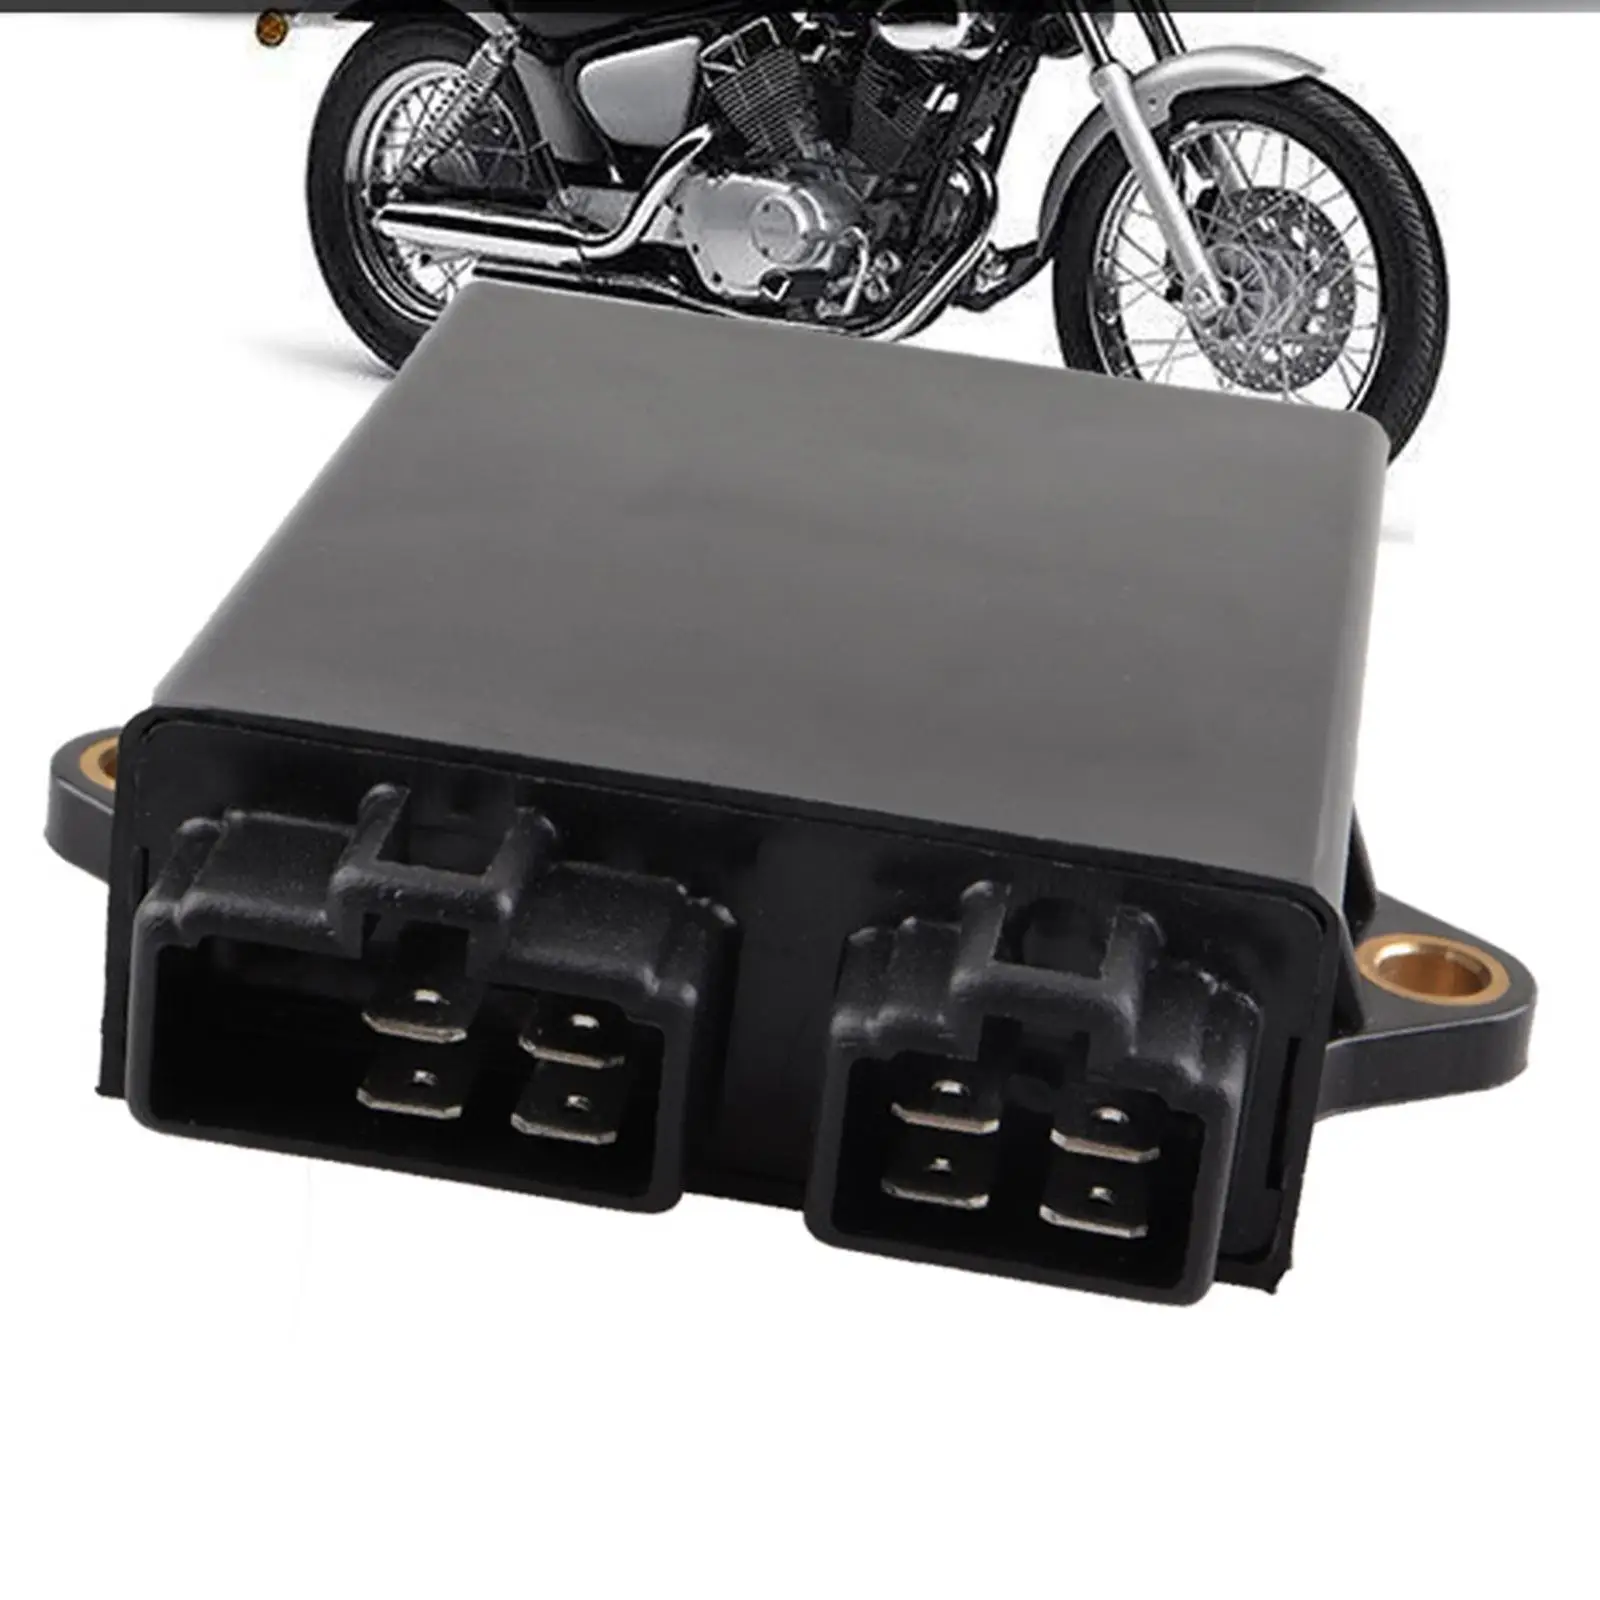 Cdi Box Ignition Control Unit Replacement for Yamaha Xtz750 Super Tenere Stable Performance Engine Parts Easily Install